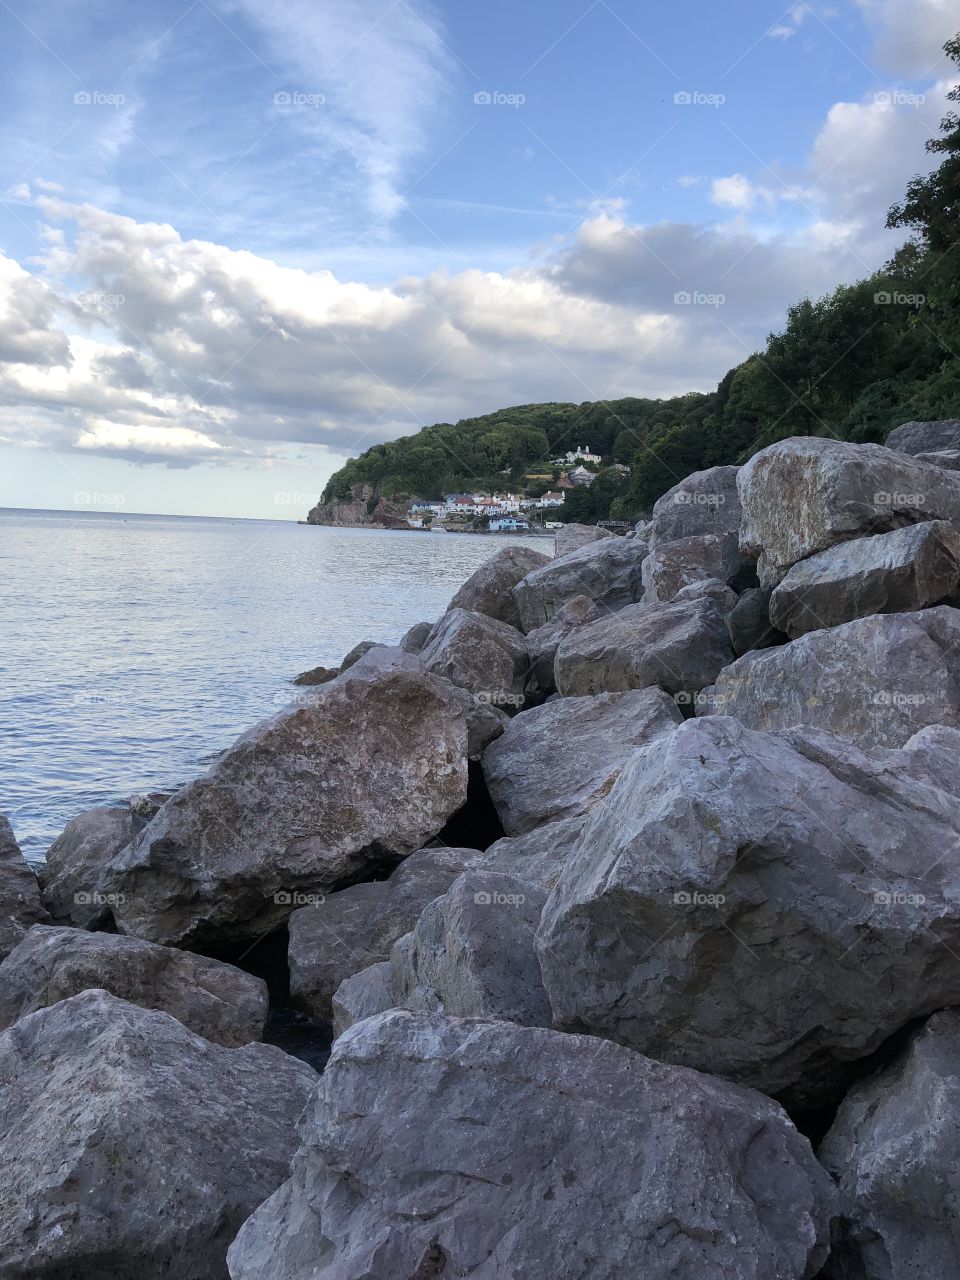 The formation of heavy rocks on route from Oddicombe and Babbacombe beaches lend themselves to an impressive image here in Torbay.